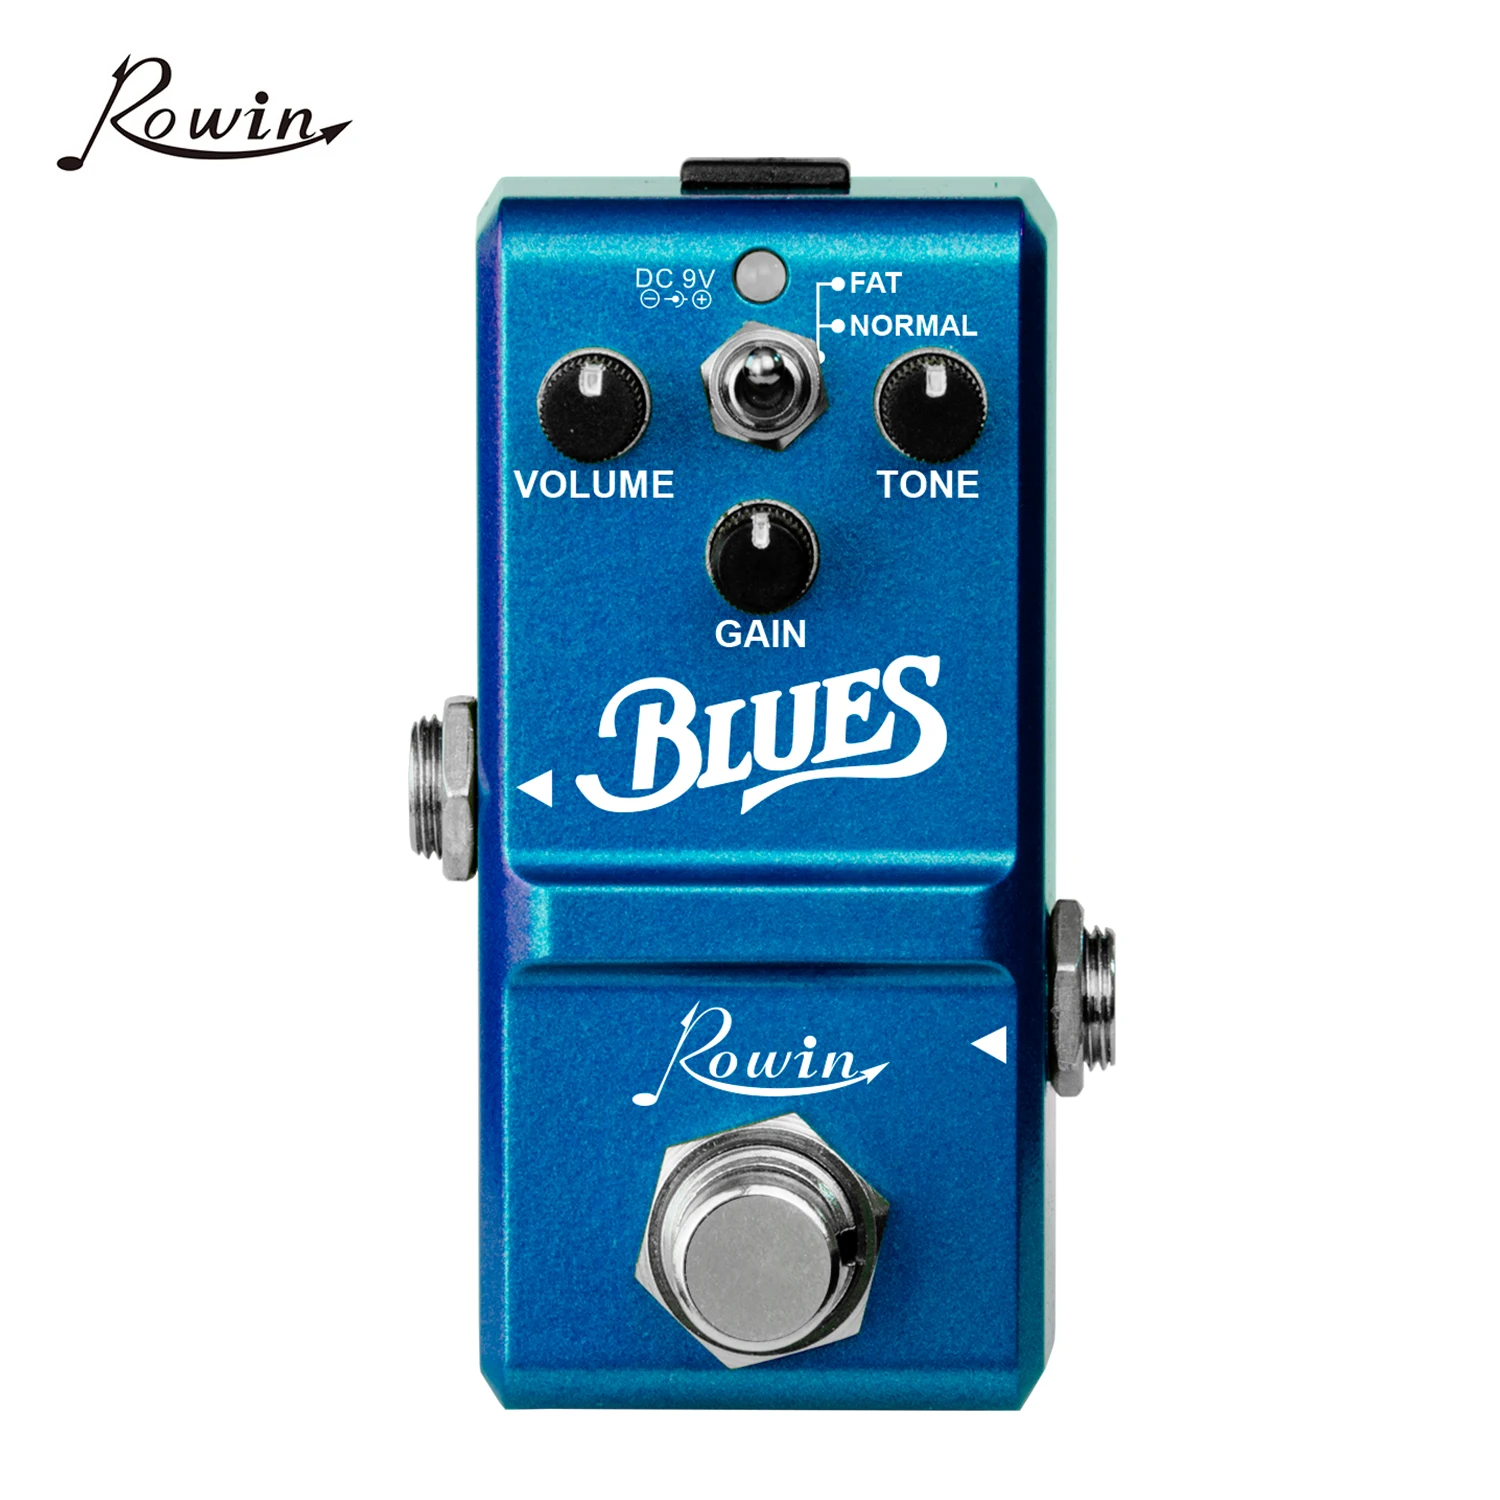 

Rowin LN-321 Blues Pedal Wide Range Frequency Response Blues Style Overdrive Effect Pedal for Guitar